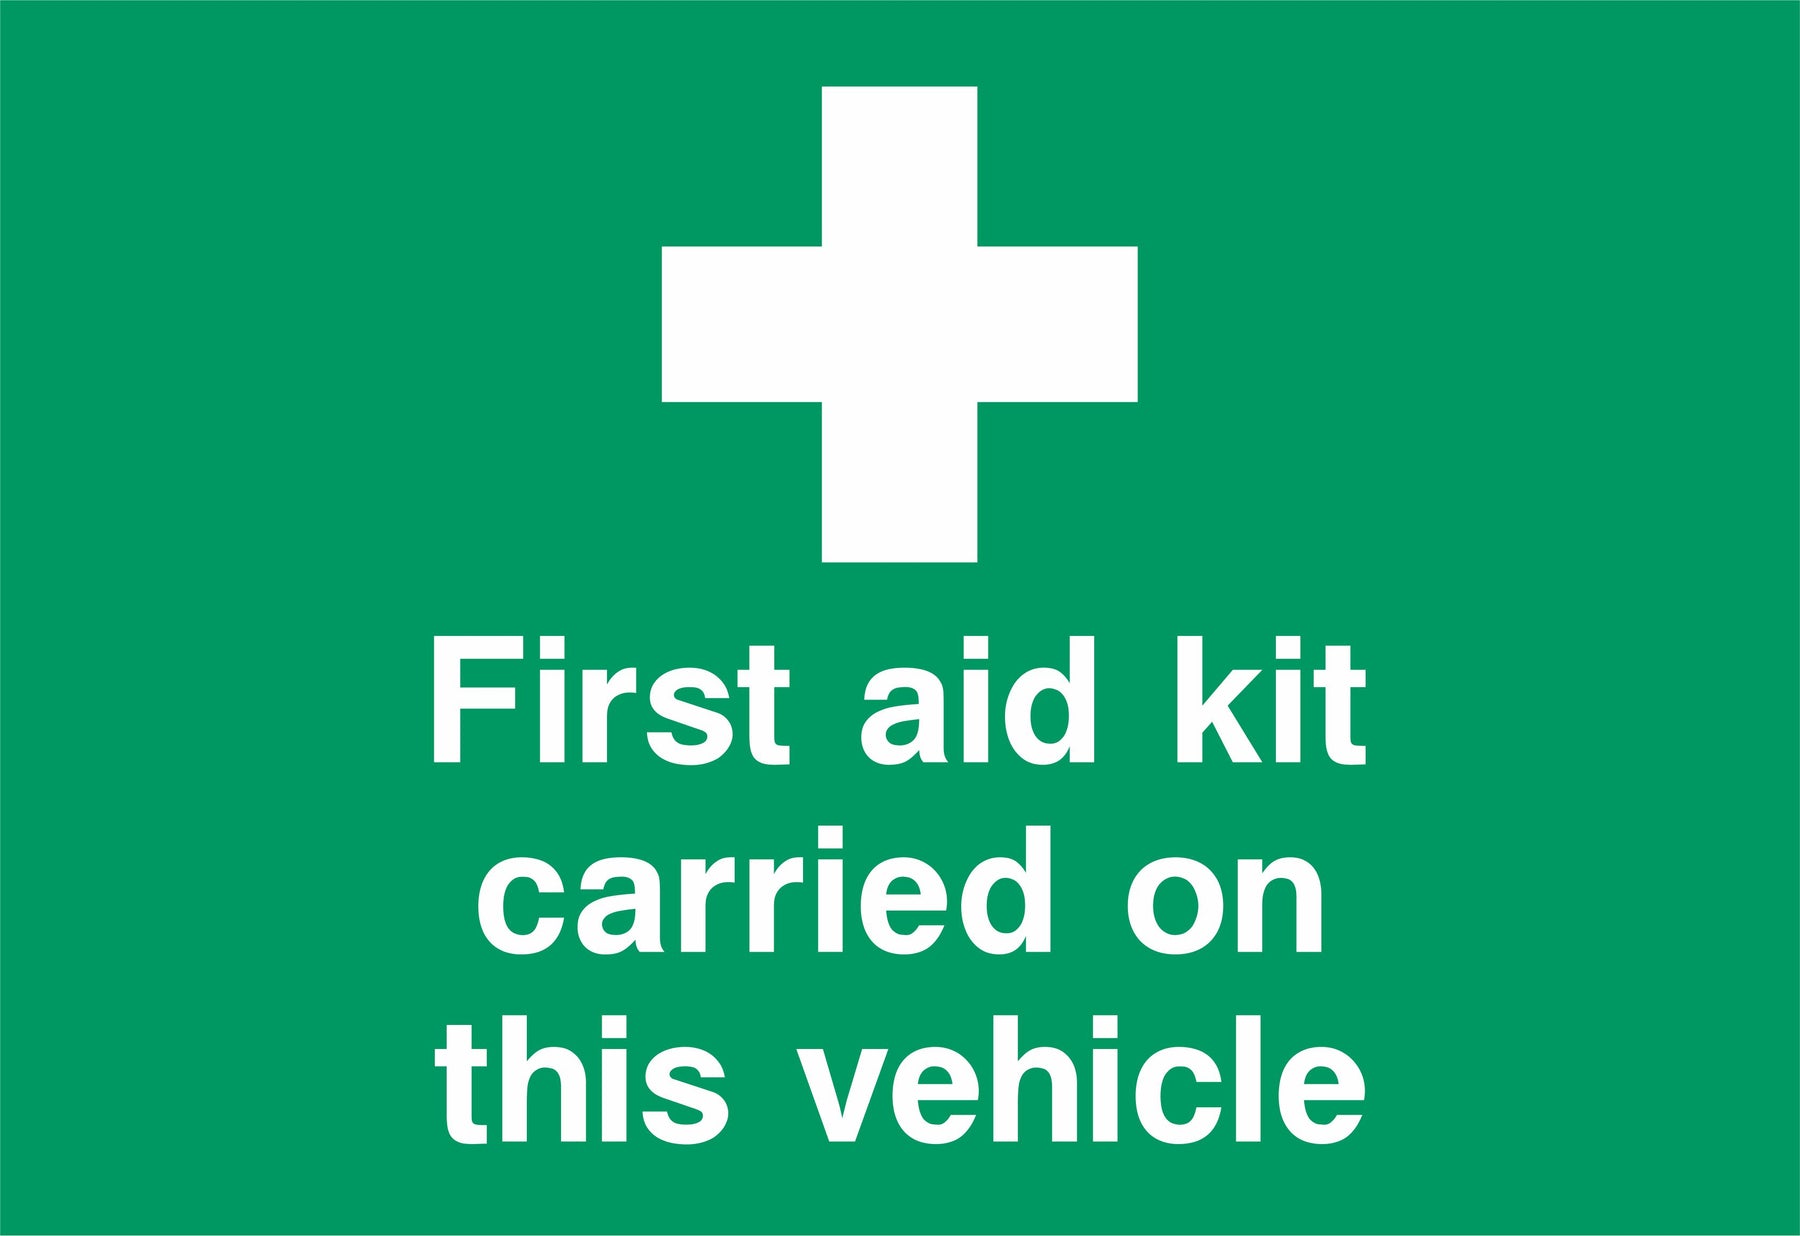 First aid kit carried on this vehicle